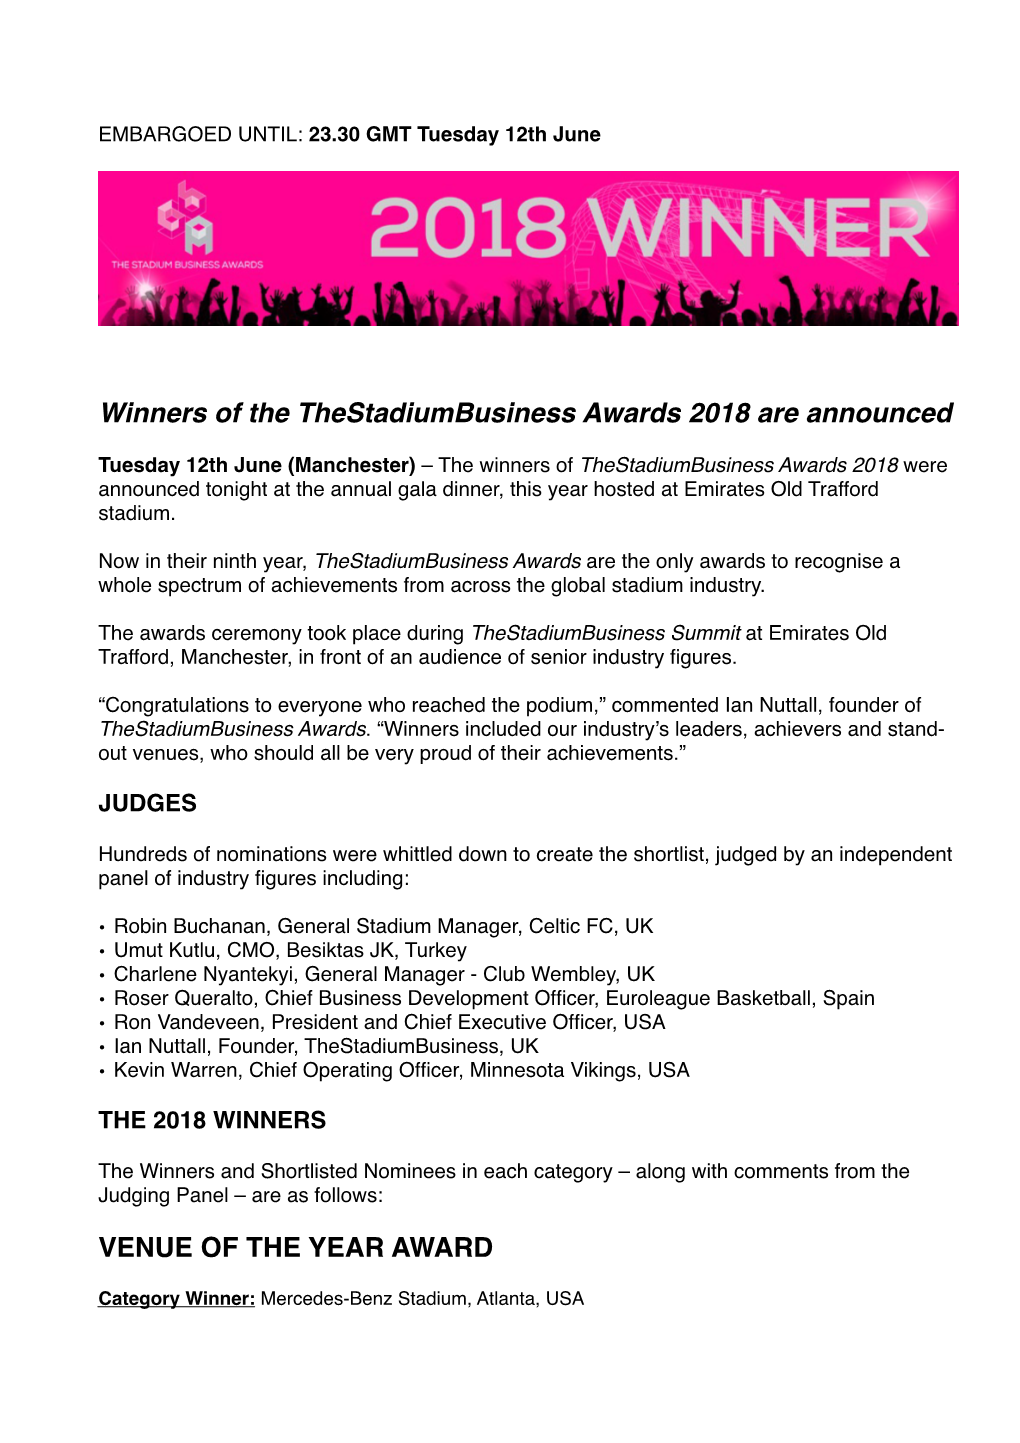 Winners of the Thestadiumbusiness Awards 2018 Are Announced